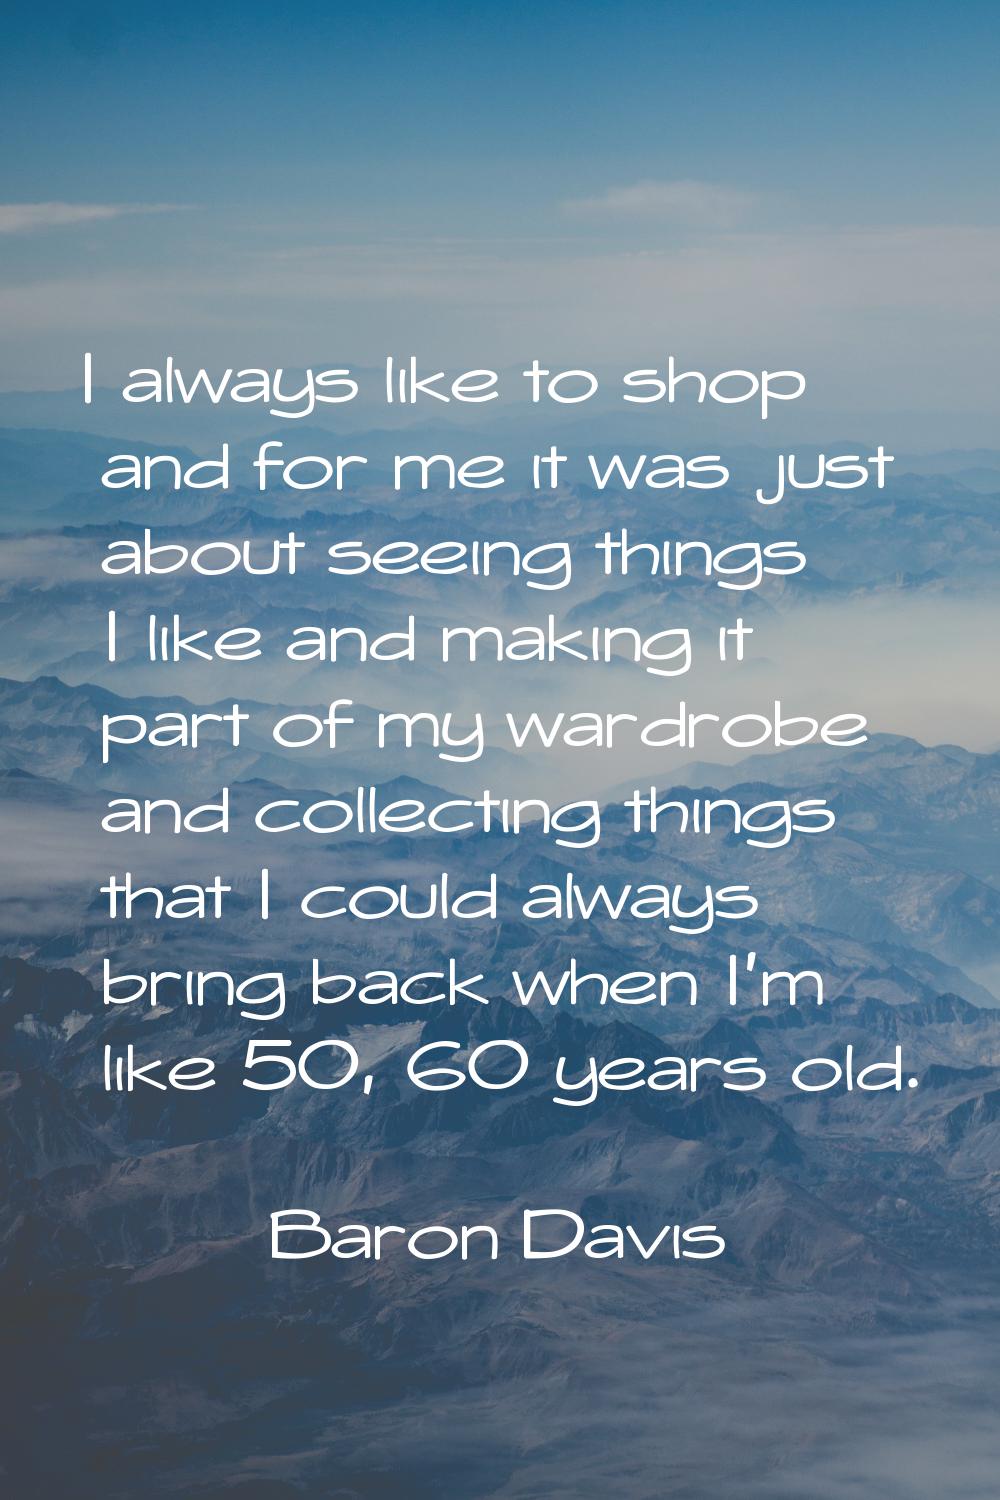 I always like to shop and for me it was just about seeing things I like and making it part of my wa